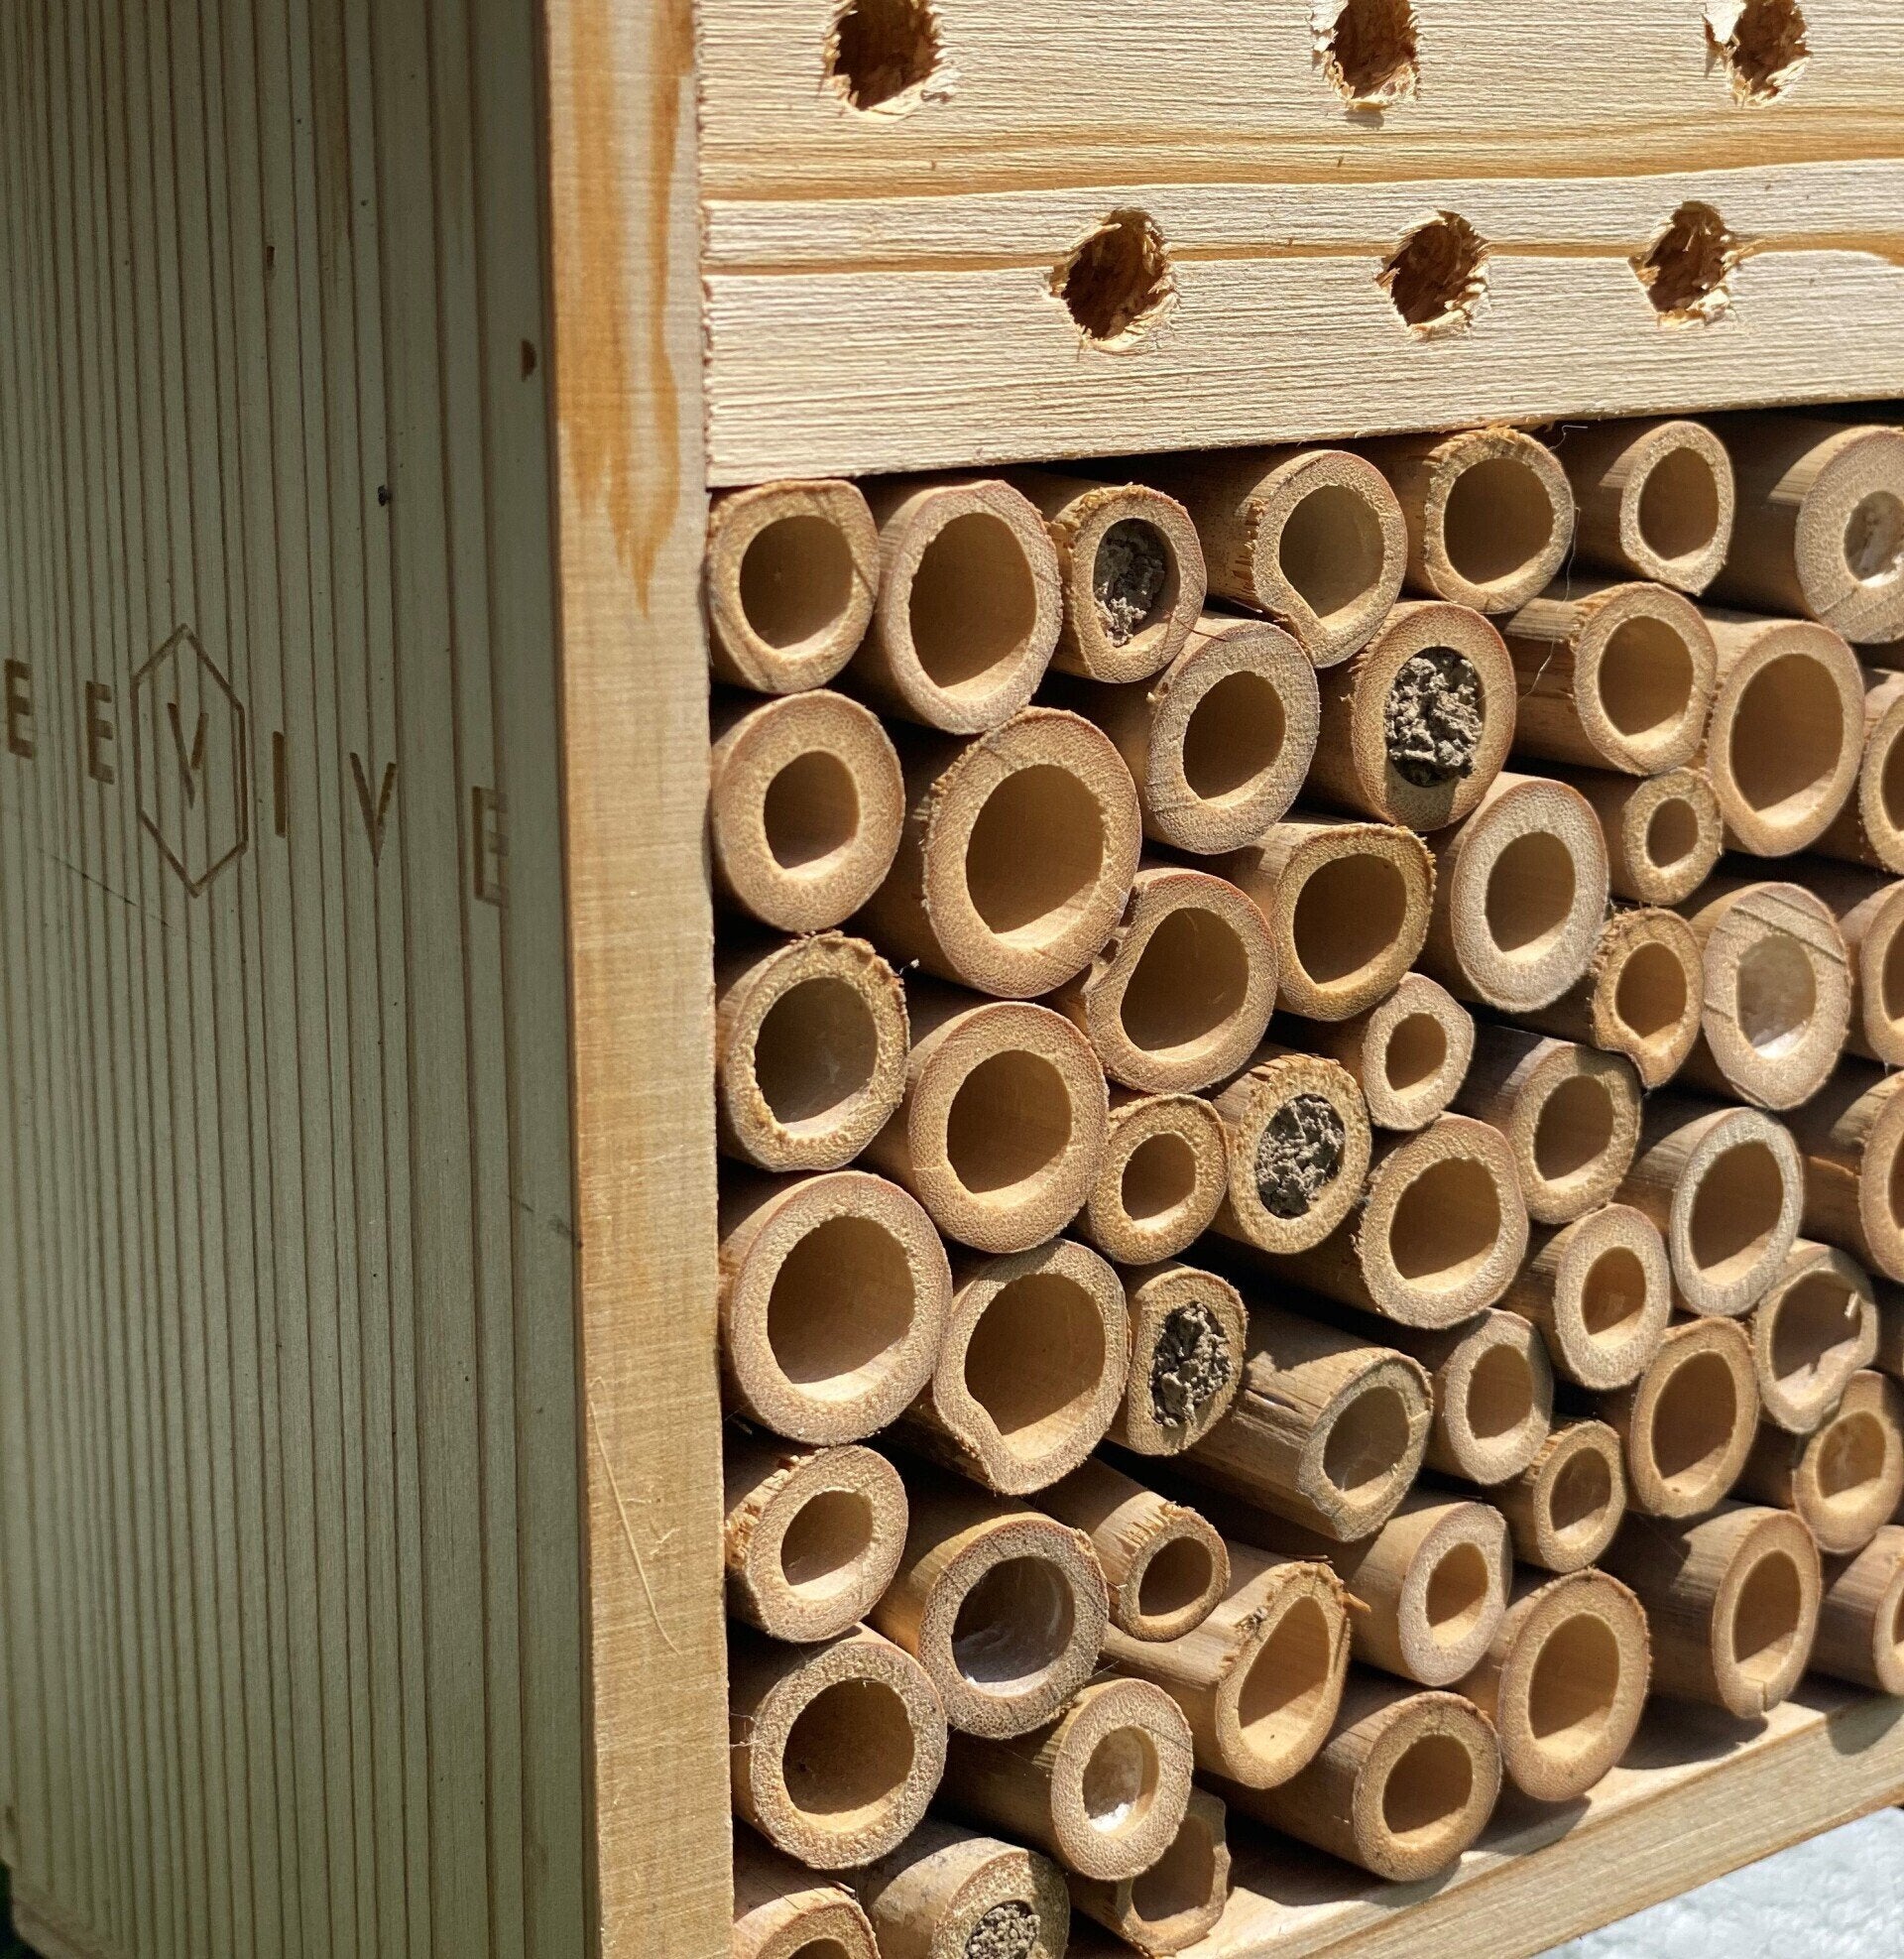 bee hotel 2.0 with many wooden tube ends sealed by bees - available from beevive.com